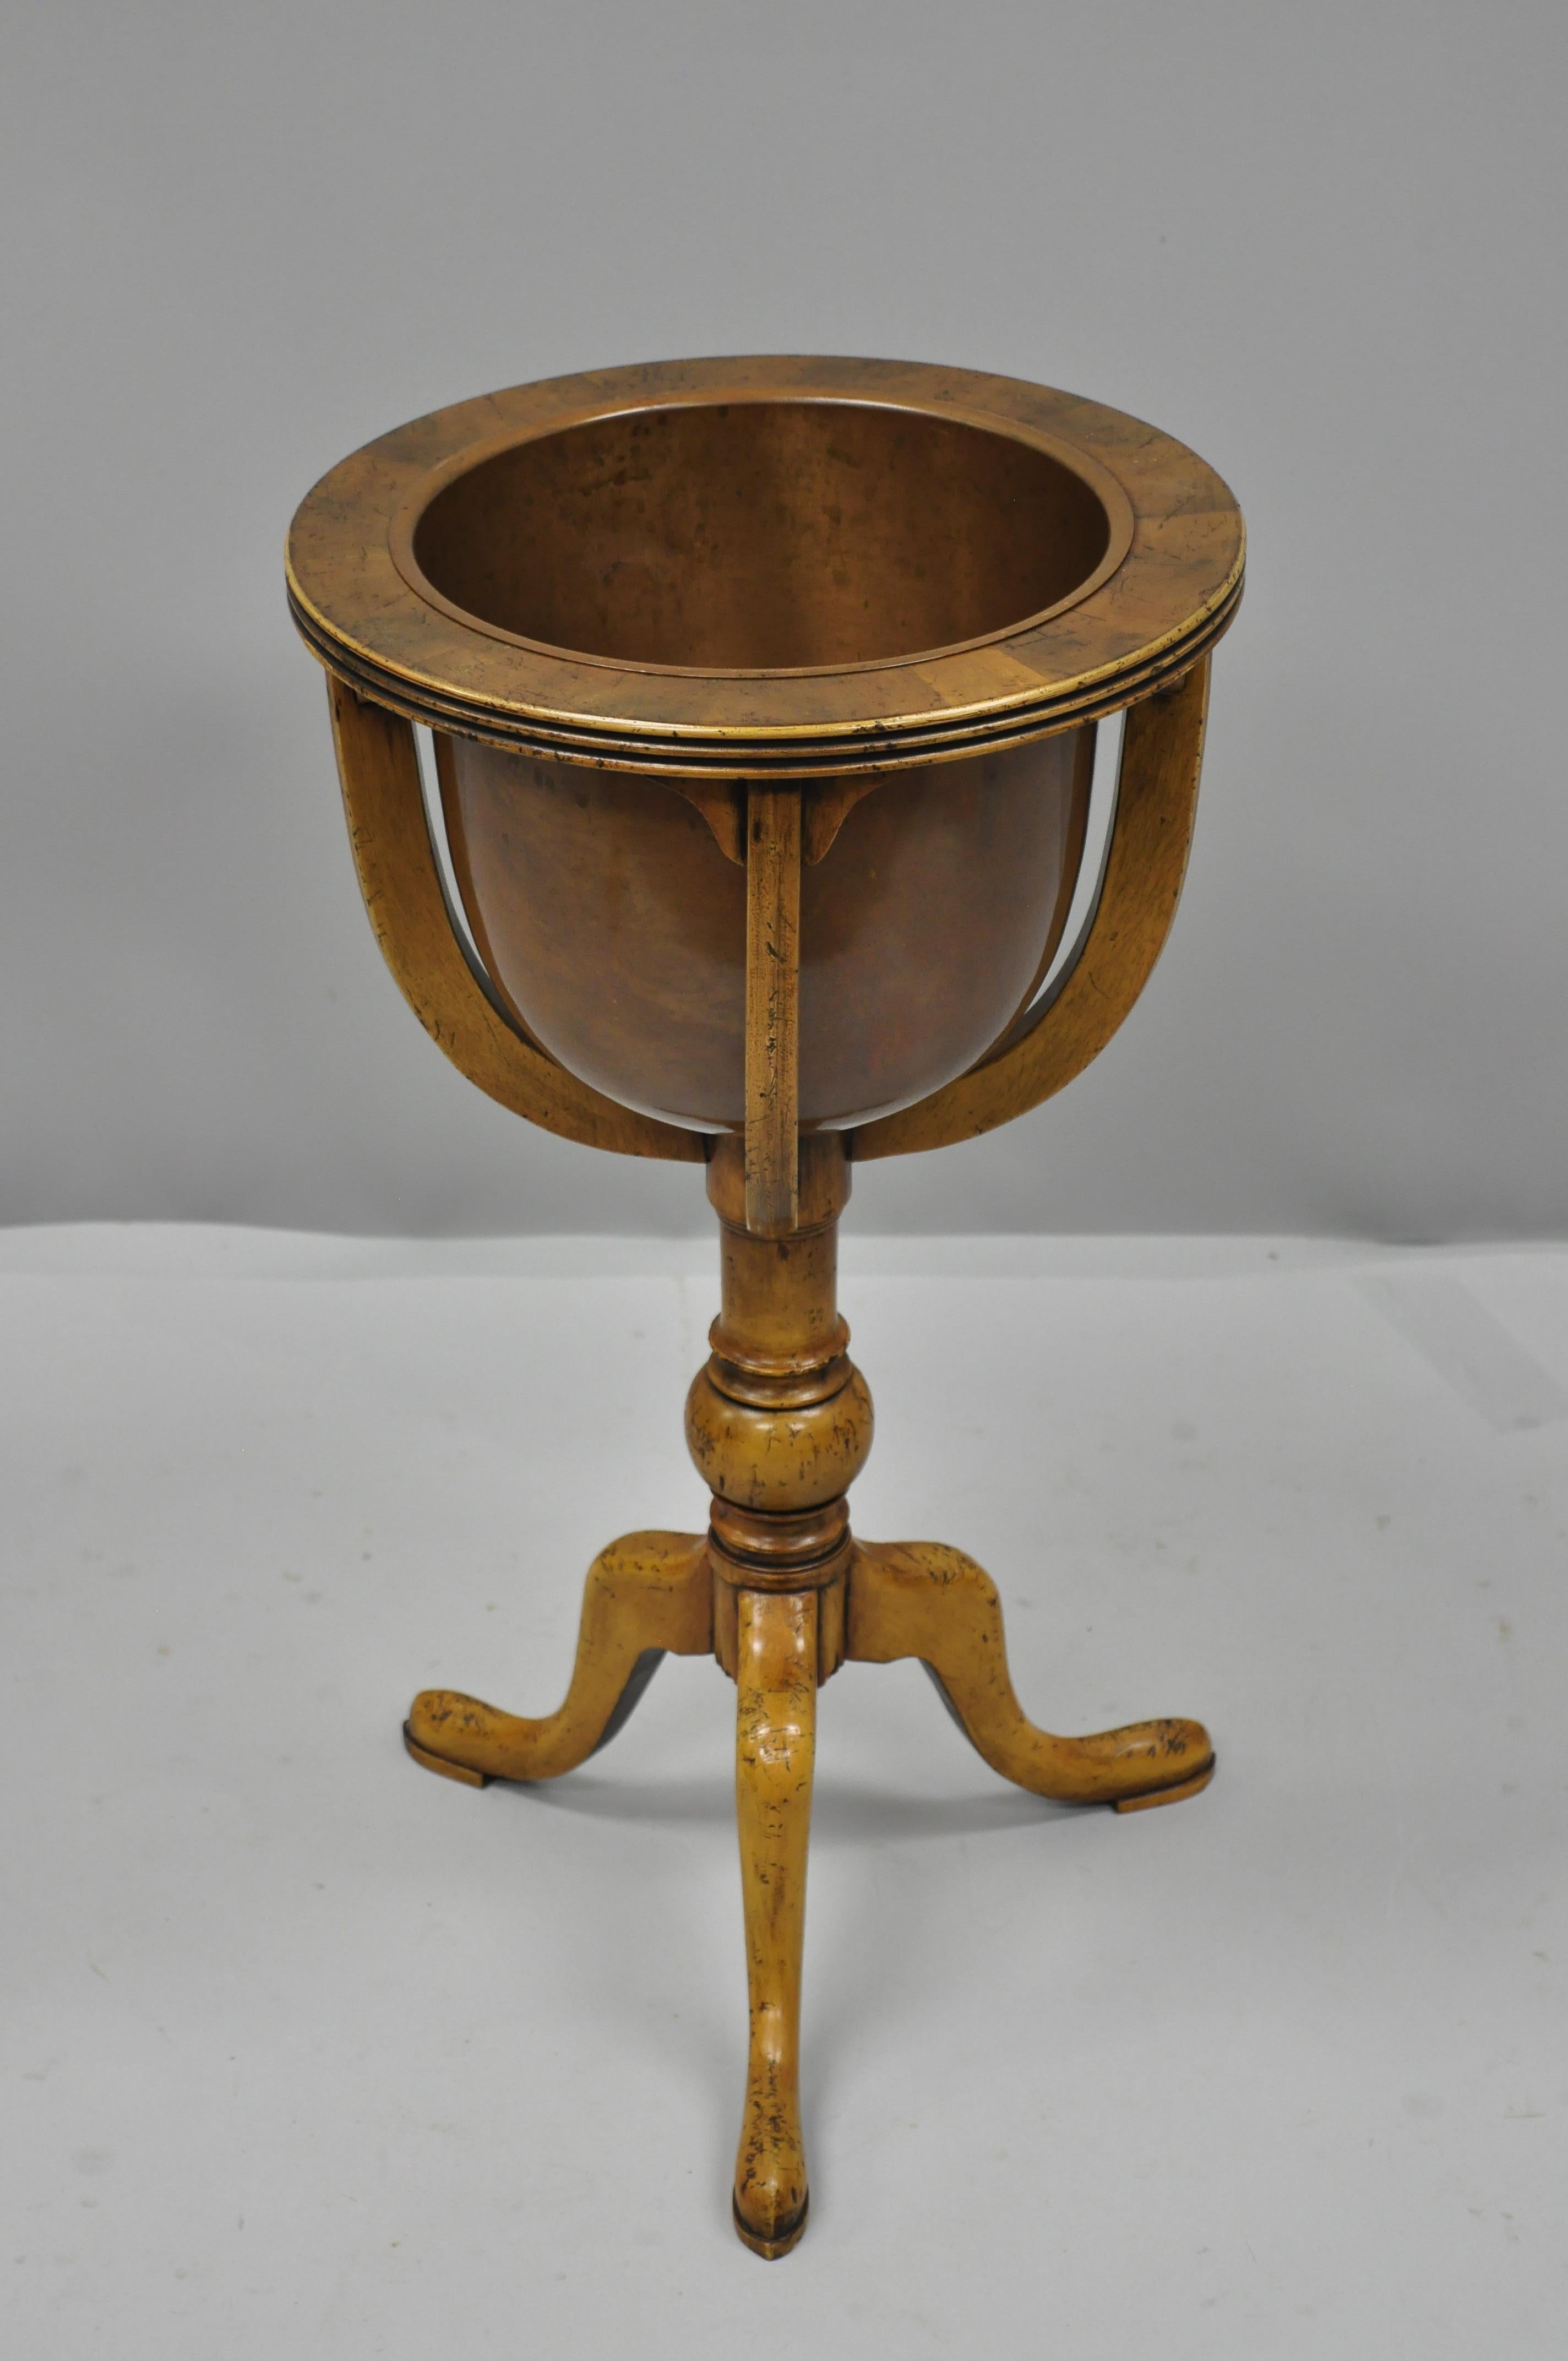 20th Century English Queen Anne Style Mahogany & Yew Wood Planter Plant Stand with Copper Pot